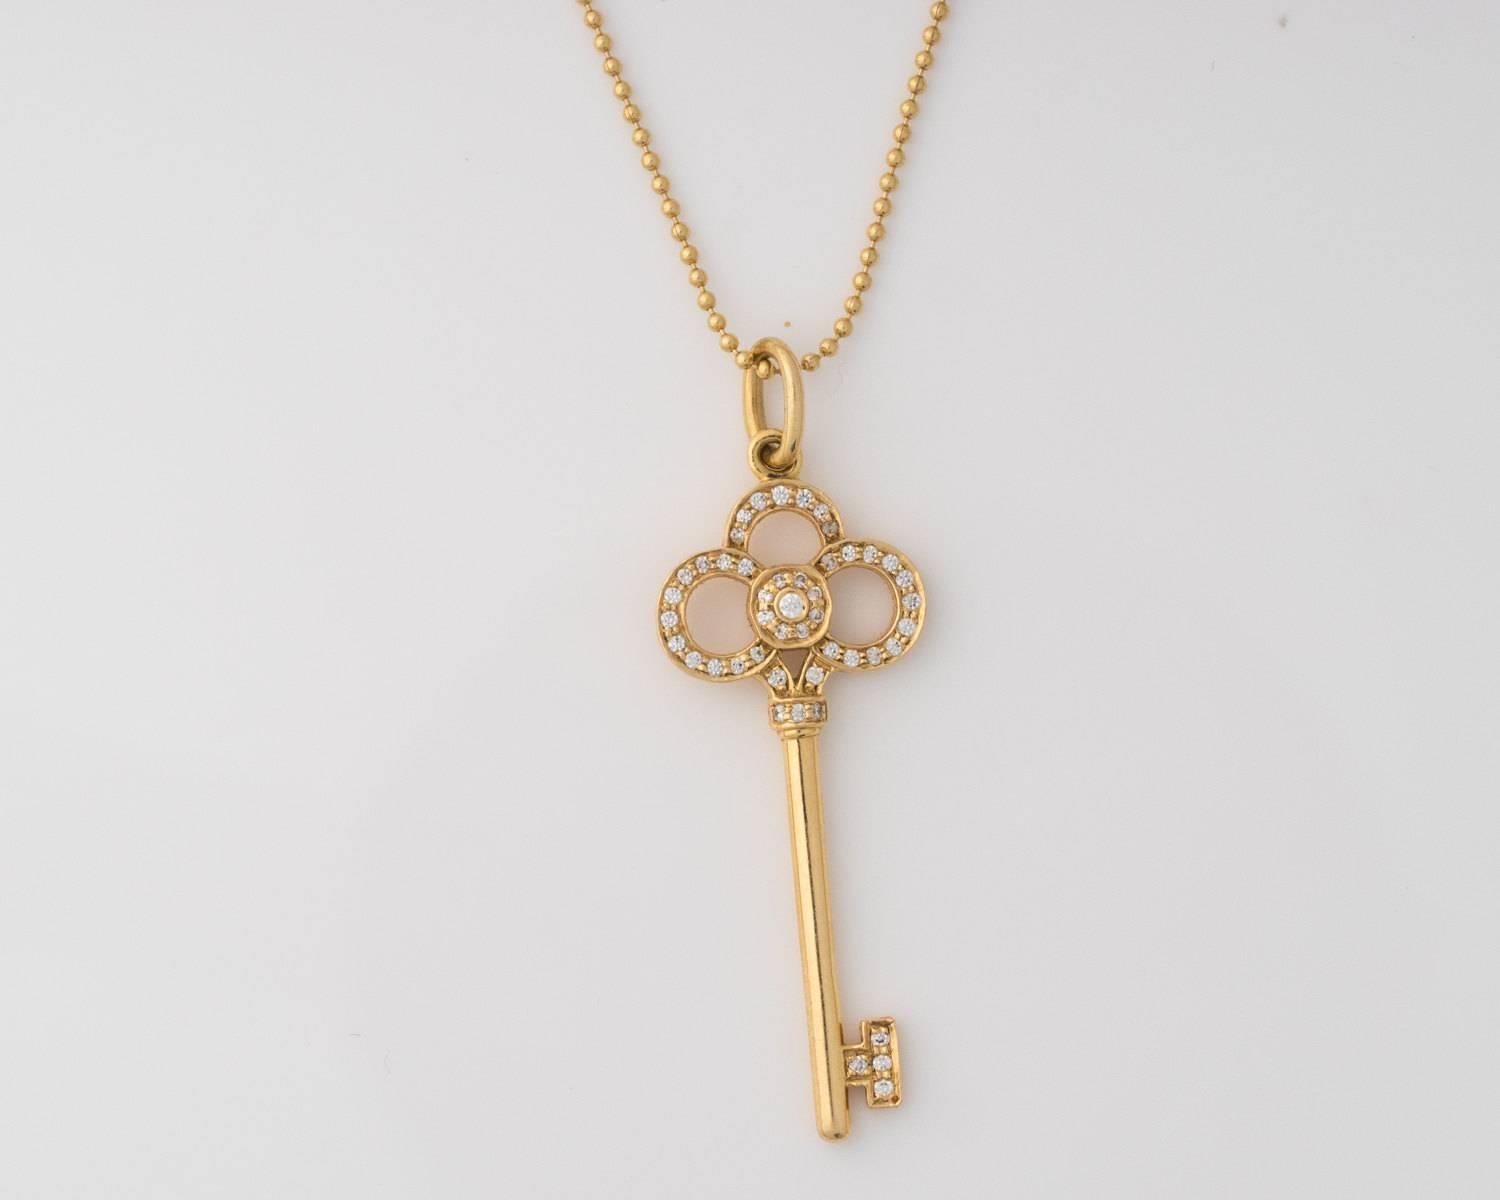 Tiffany & Co Crown Key Pendant Necklace
Forty Five Precision-Set Diamonds
Diamonds are 0.45 Carat Total Weight, G Color, VS1 Clarity
Crafted in 18 Karat Rose Gold 
Accompanied with 18 Karat Rose Gold Chain, measures 16 Inches

